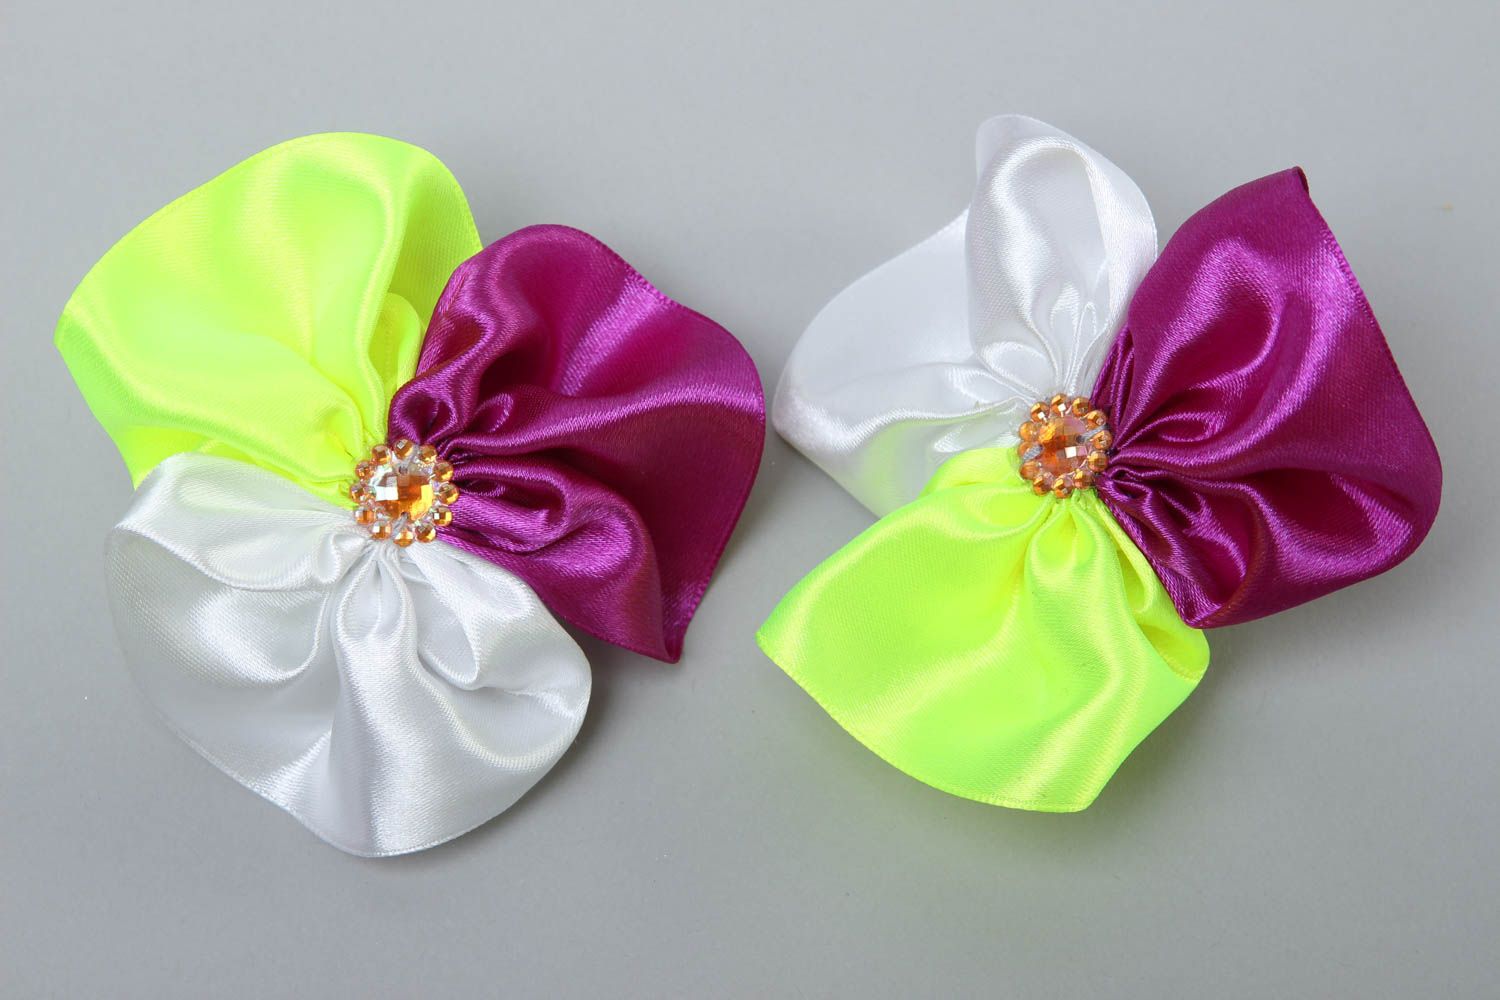 Handmade hair ties flower hair accessories gifts for girls hair decorations photo 2